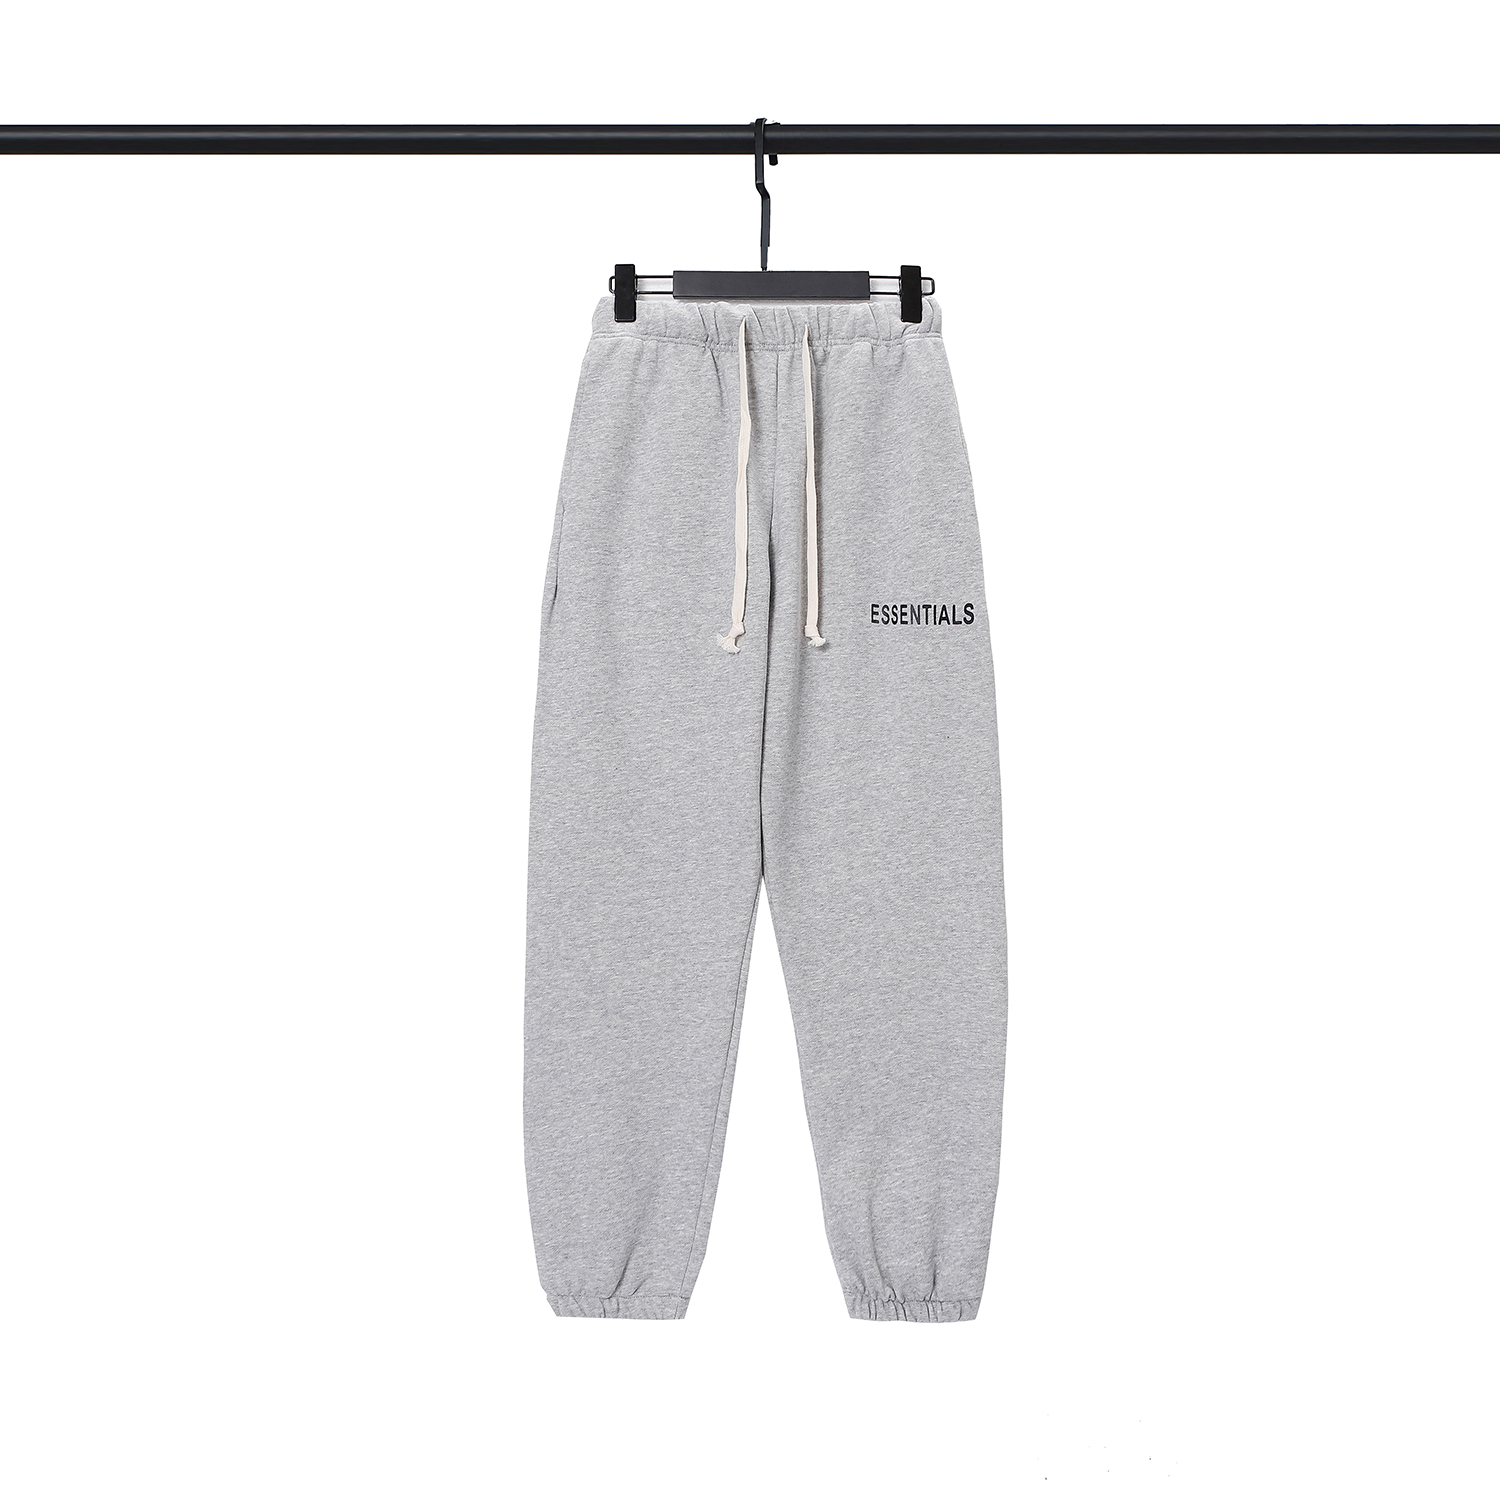 Buying Replica
 ESSENTIALS Clothing Pants & Trousers Black Grey Cotton Essential